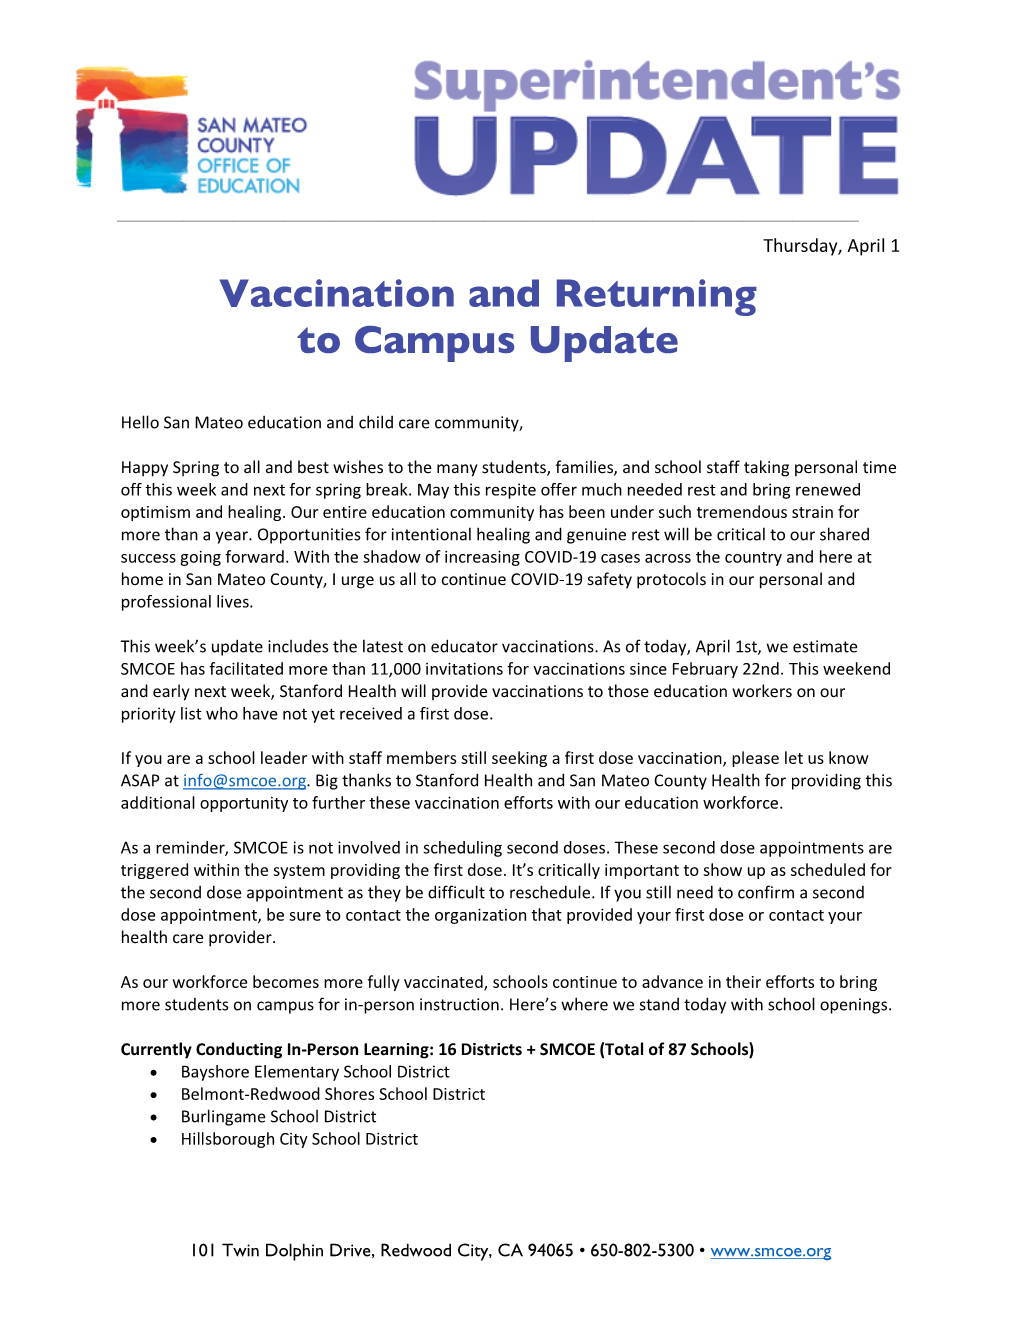 Vaccination and Returning to Campus Update